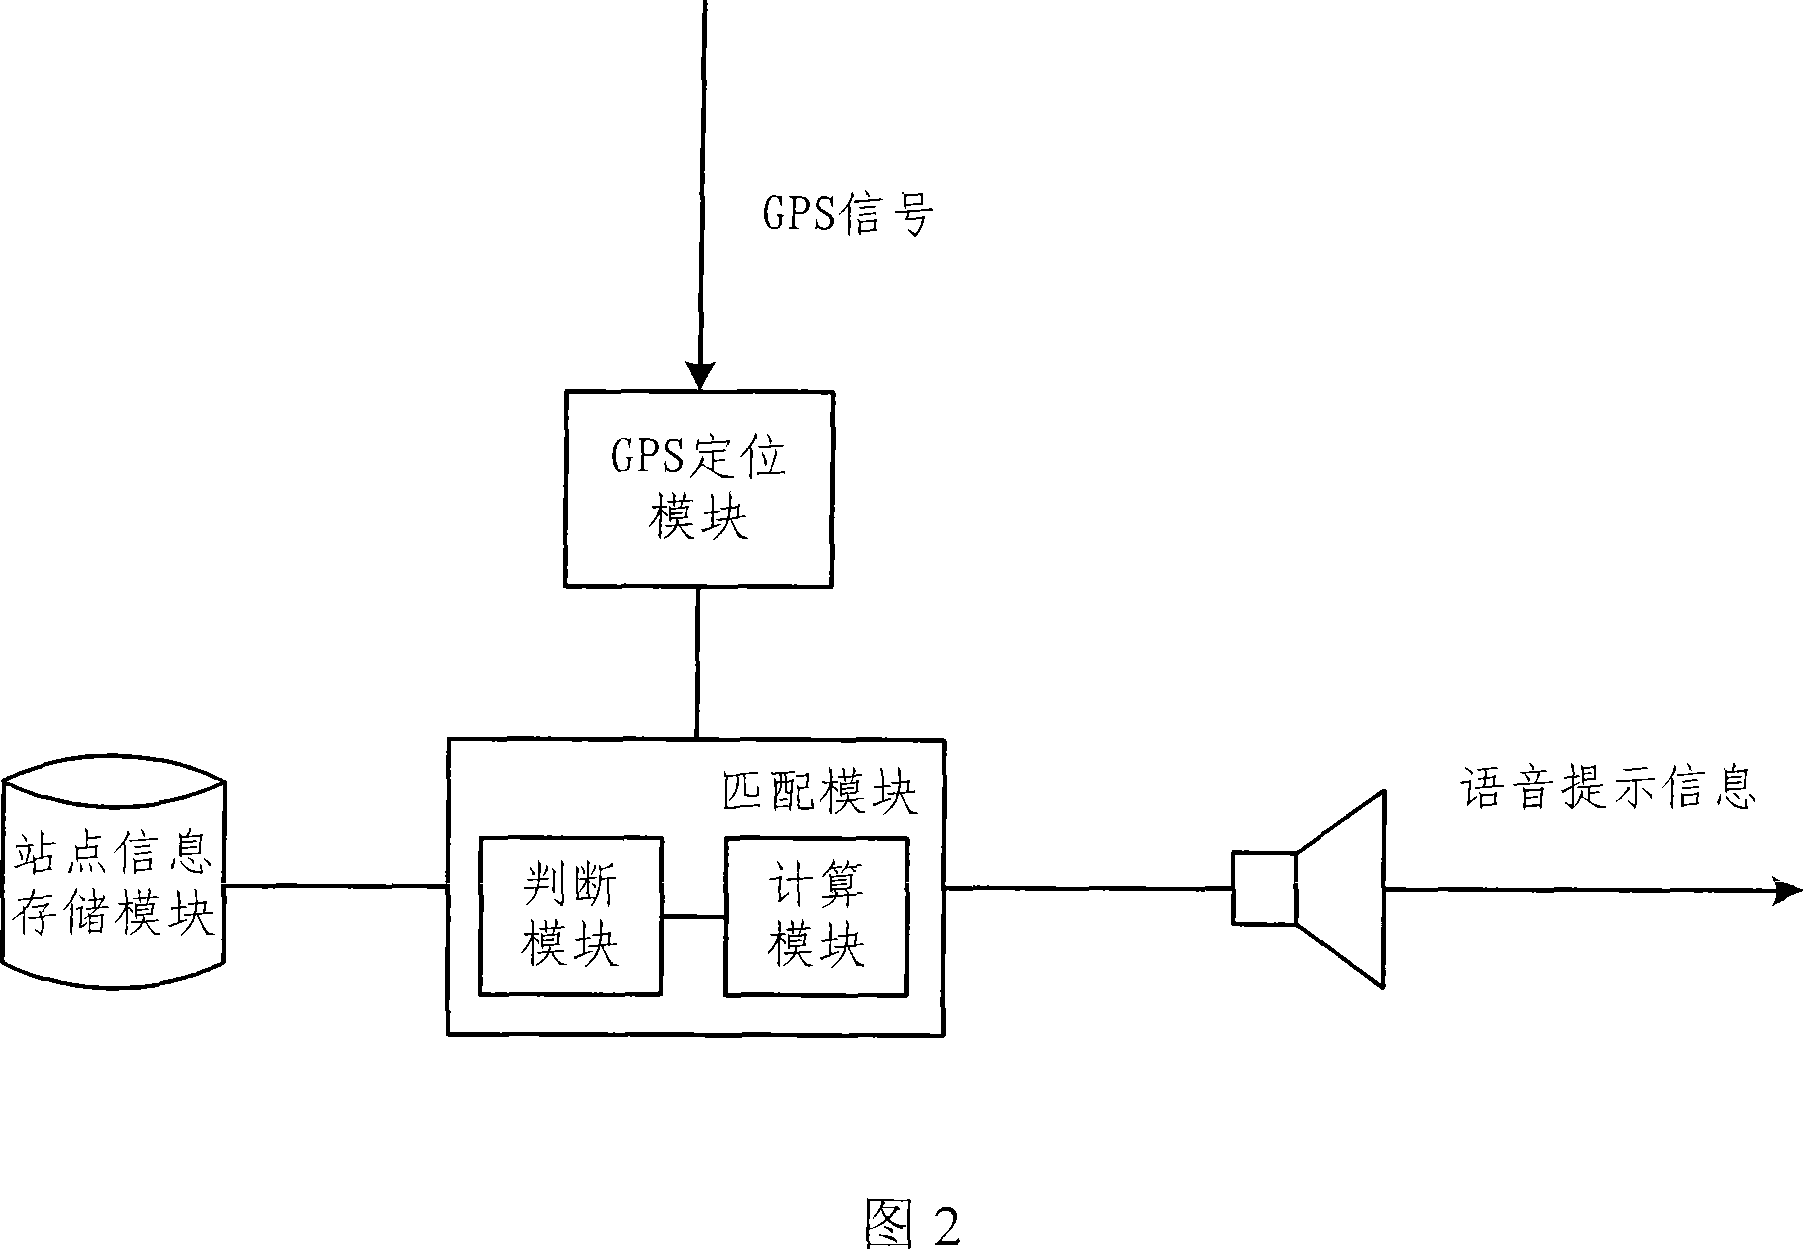 Device and method for reporting station of public transport